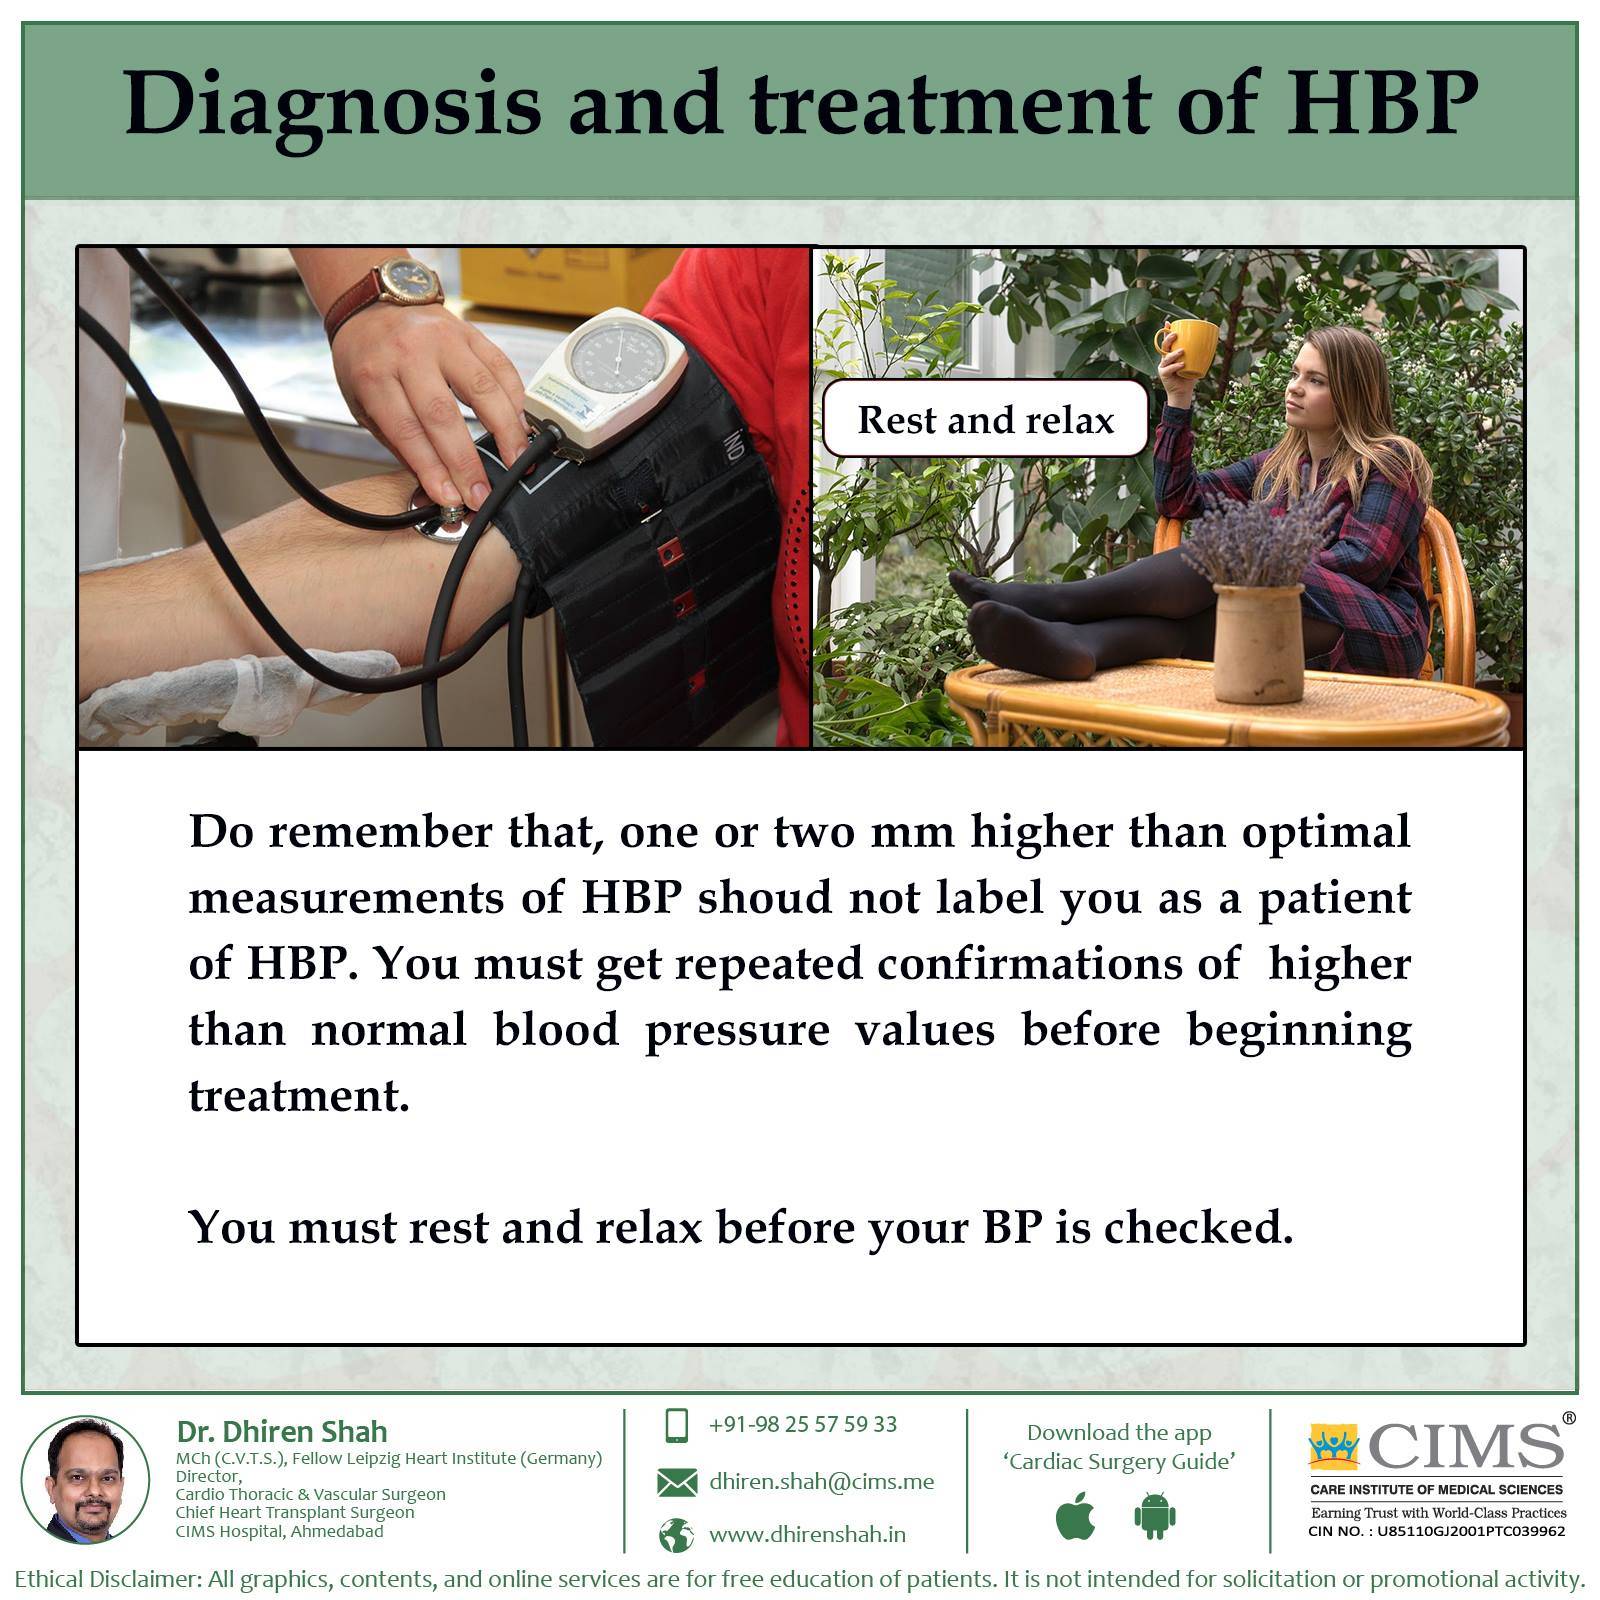 Diagnosis and treatment of HBP